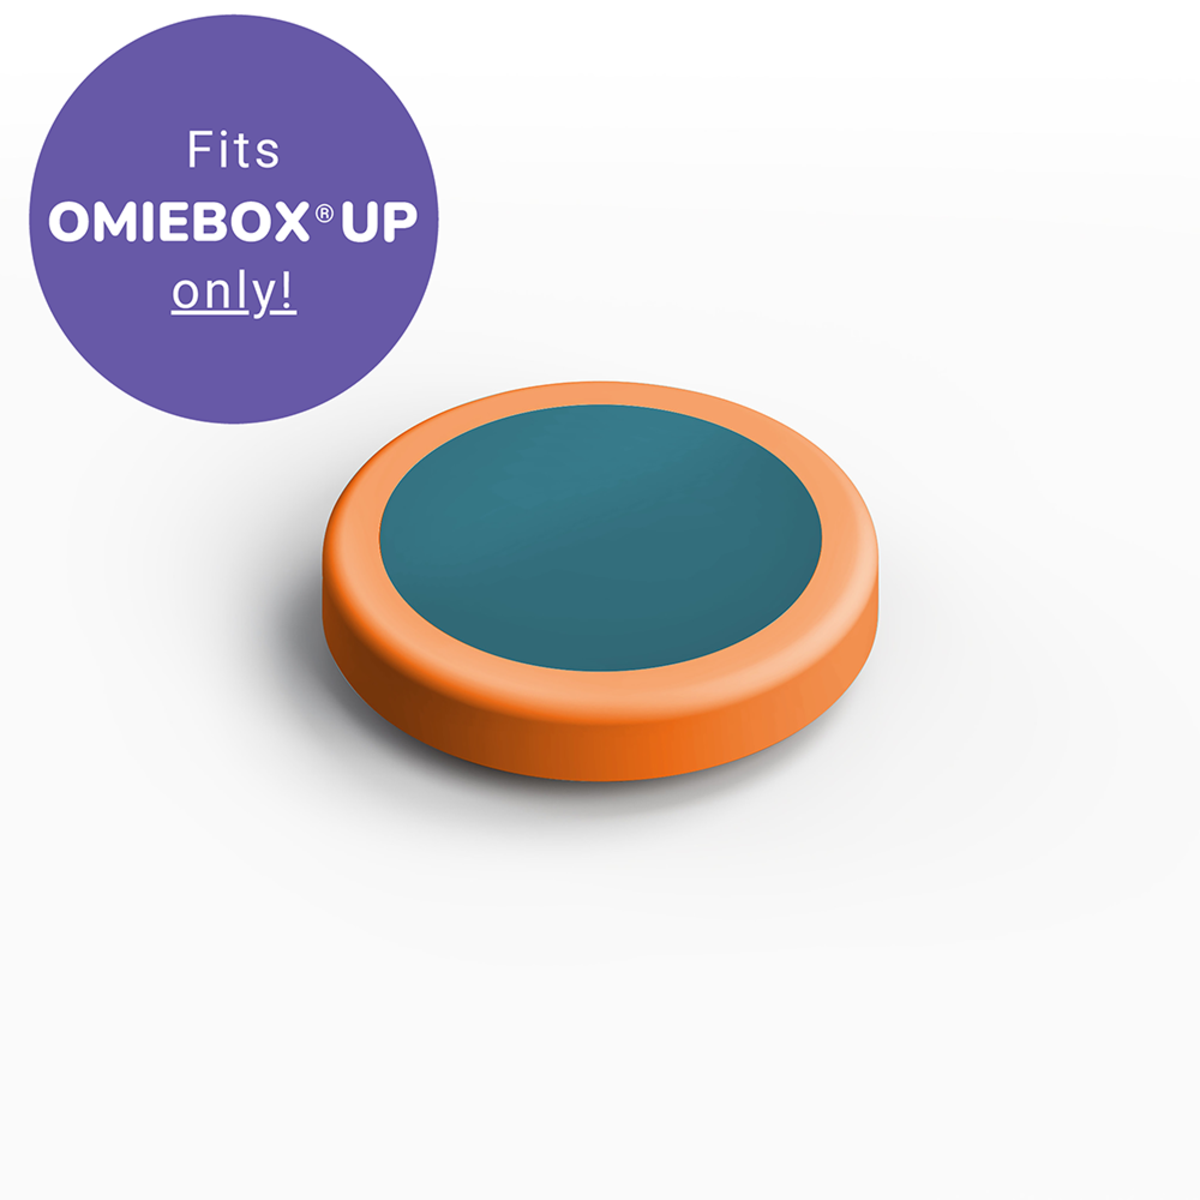 OmieBox Flask Lid to suit OmieBox UP